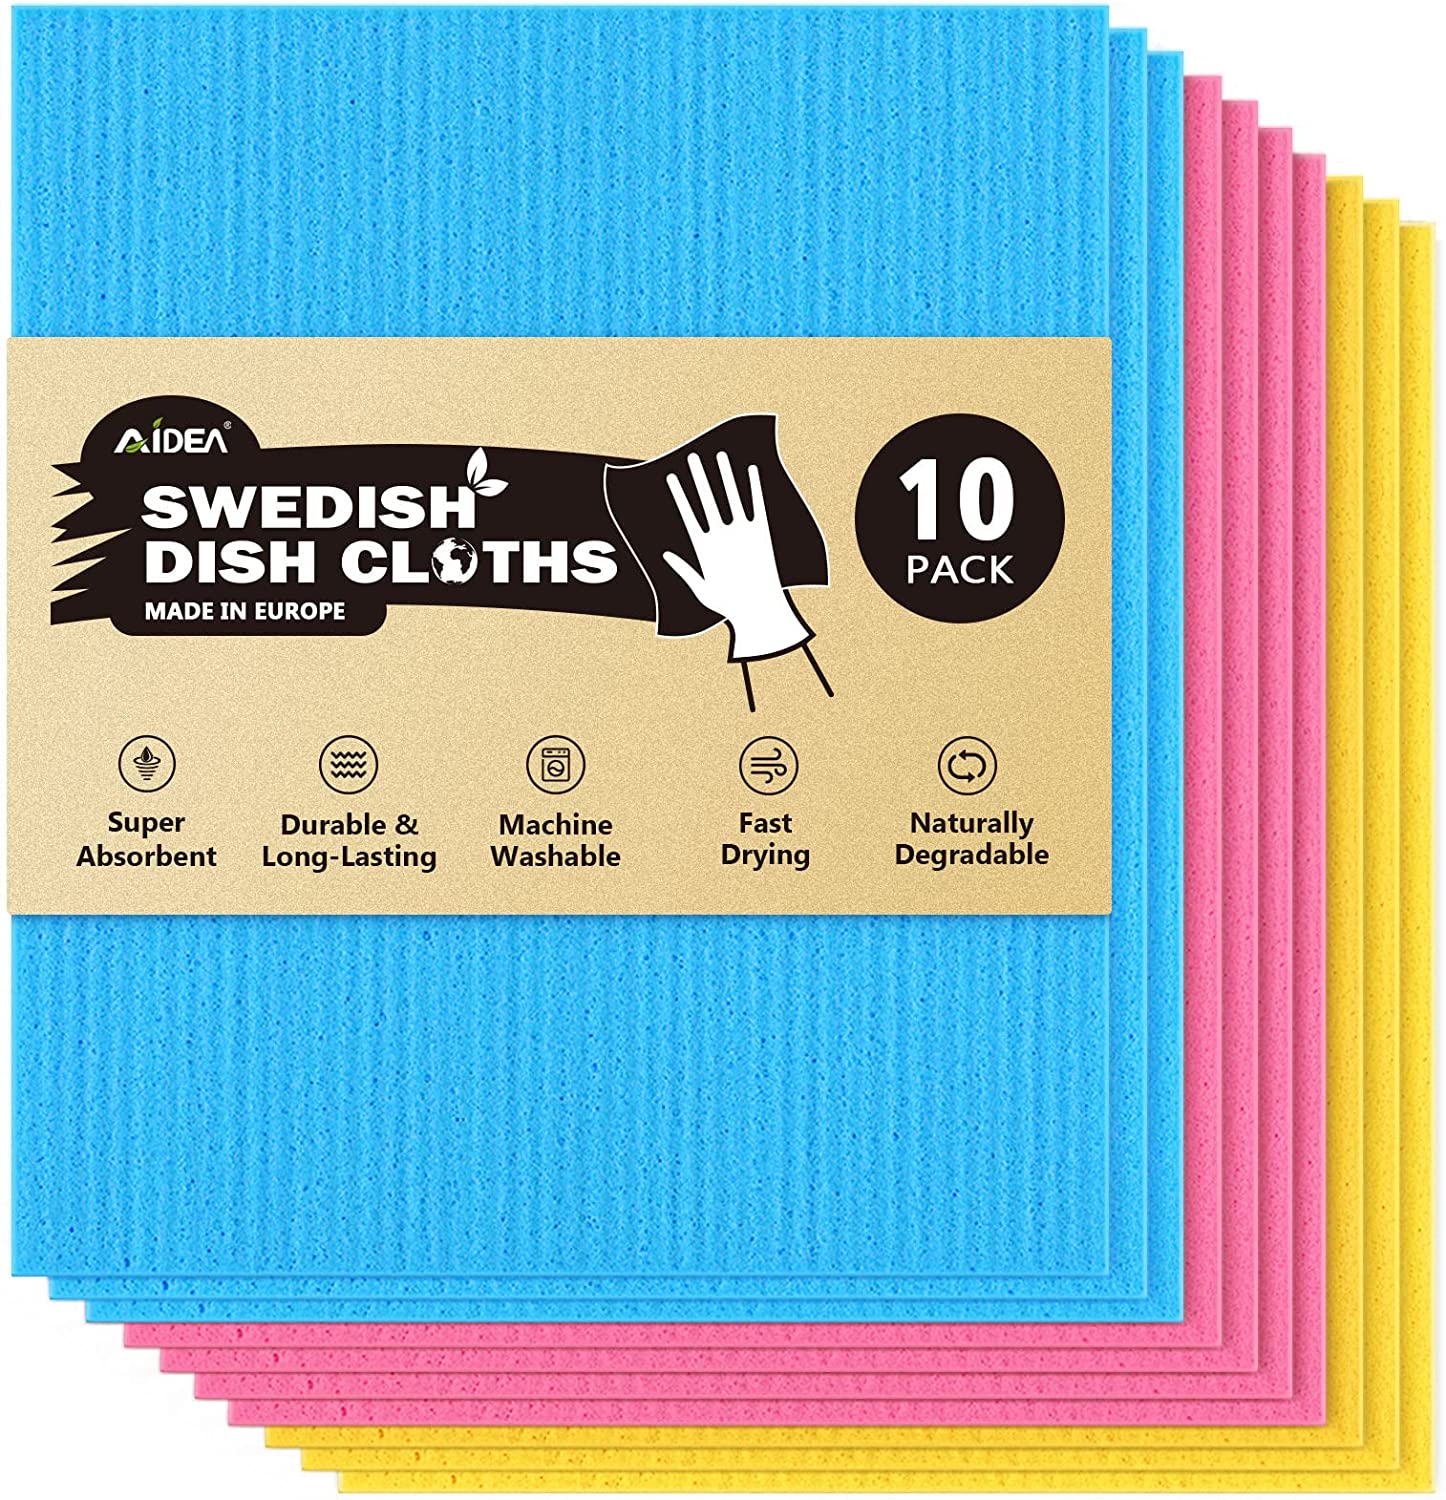 SUPERSCANDI Swedish Dish Clothes 6 Pack of Black Reusable Compostable  Kitchen Cloth Made in Sweden Cellulose Sponge Dish Cloths for Washing Dishes